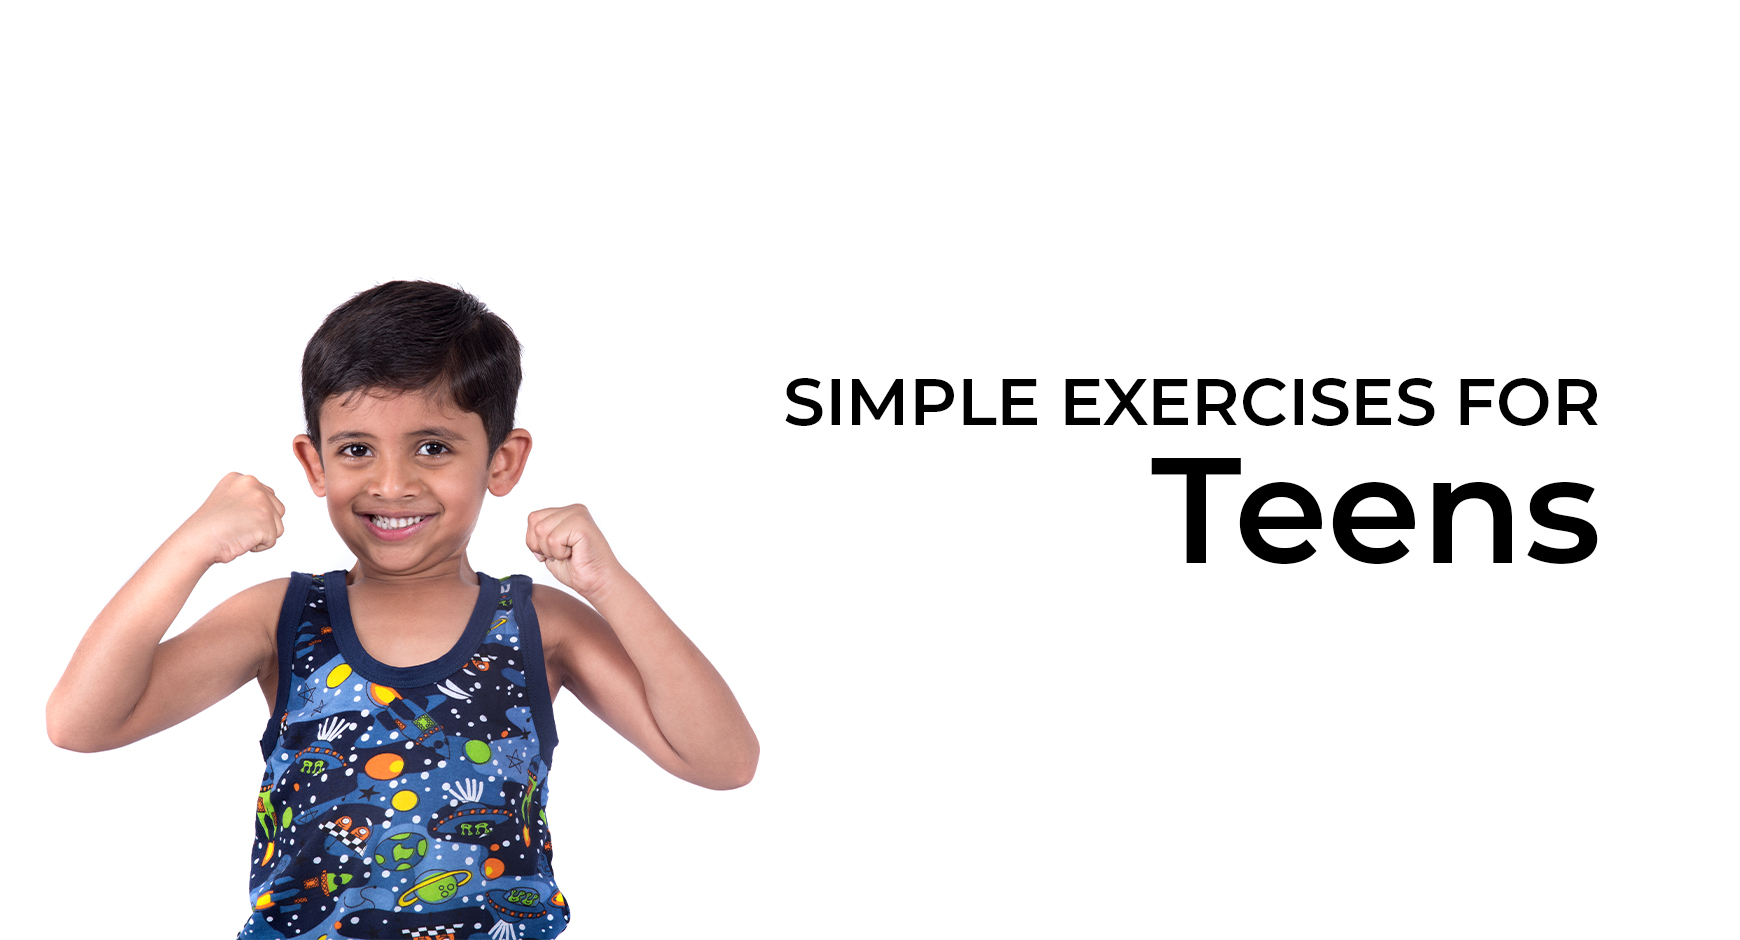 Simple Exercises for Teens